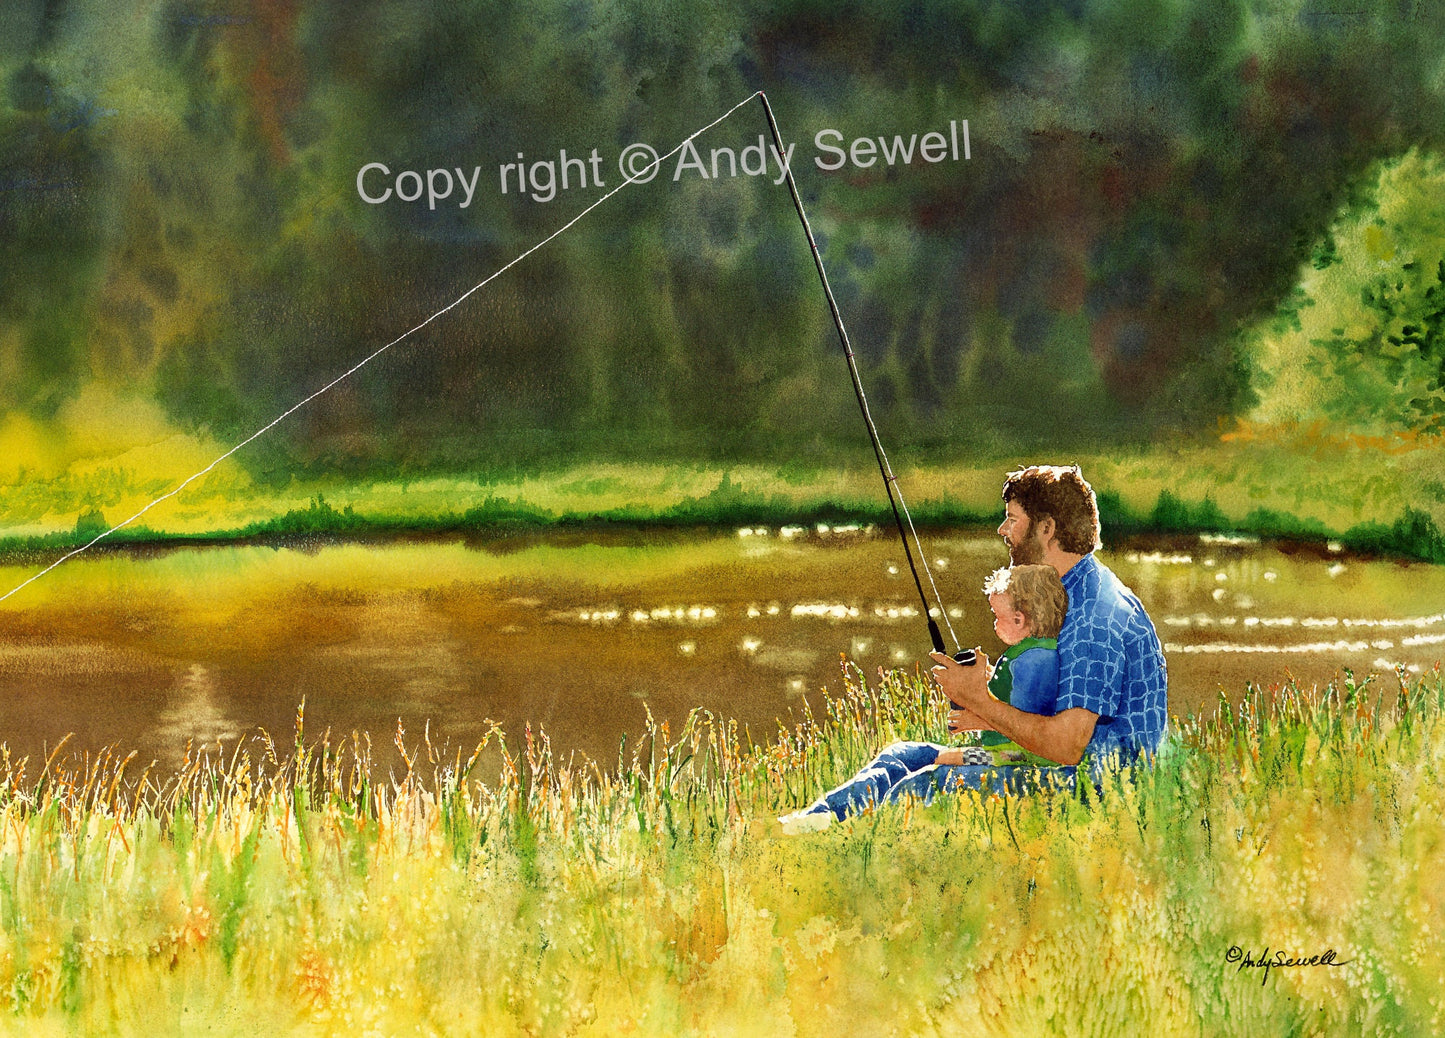 "First Fish" 20x32 art print - a ltd. edition s/n giclee watercolor print of my son fishing with me!